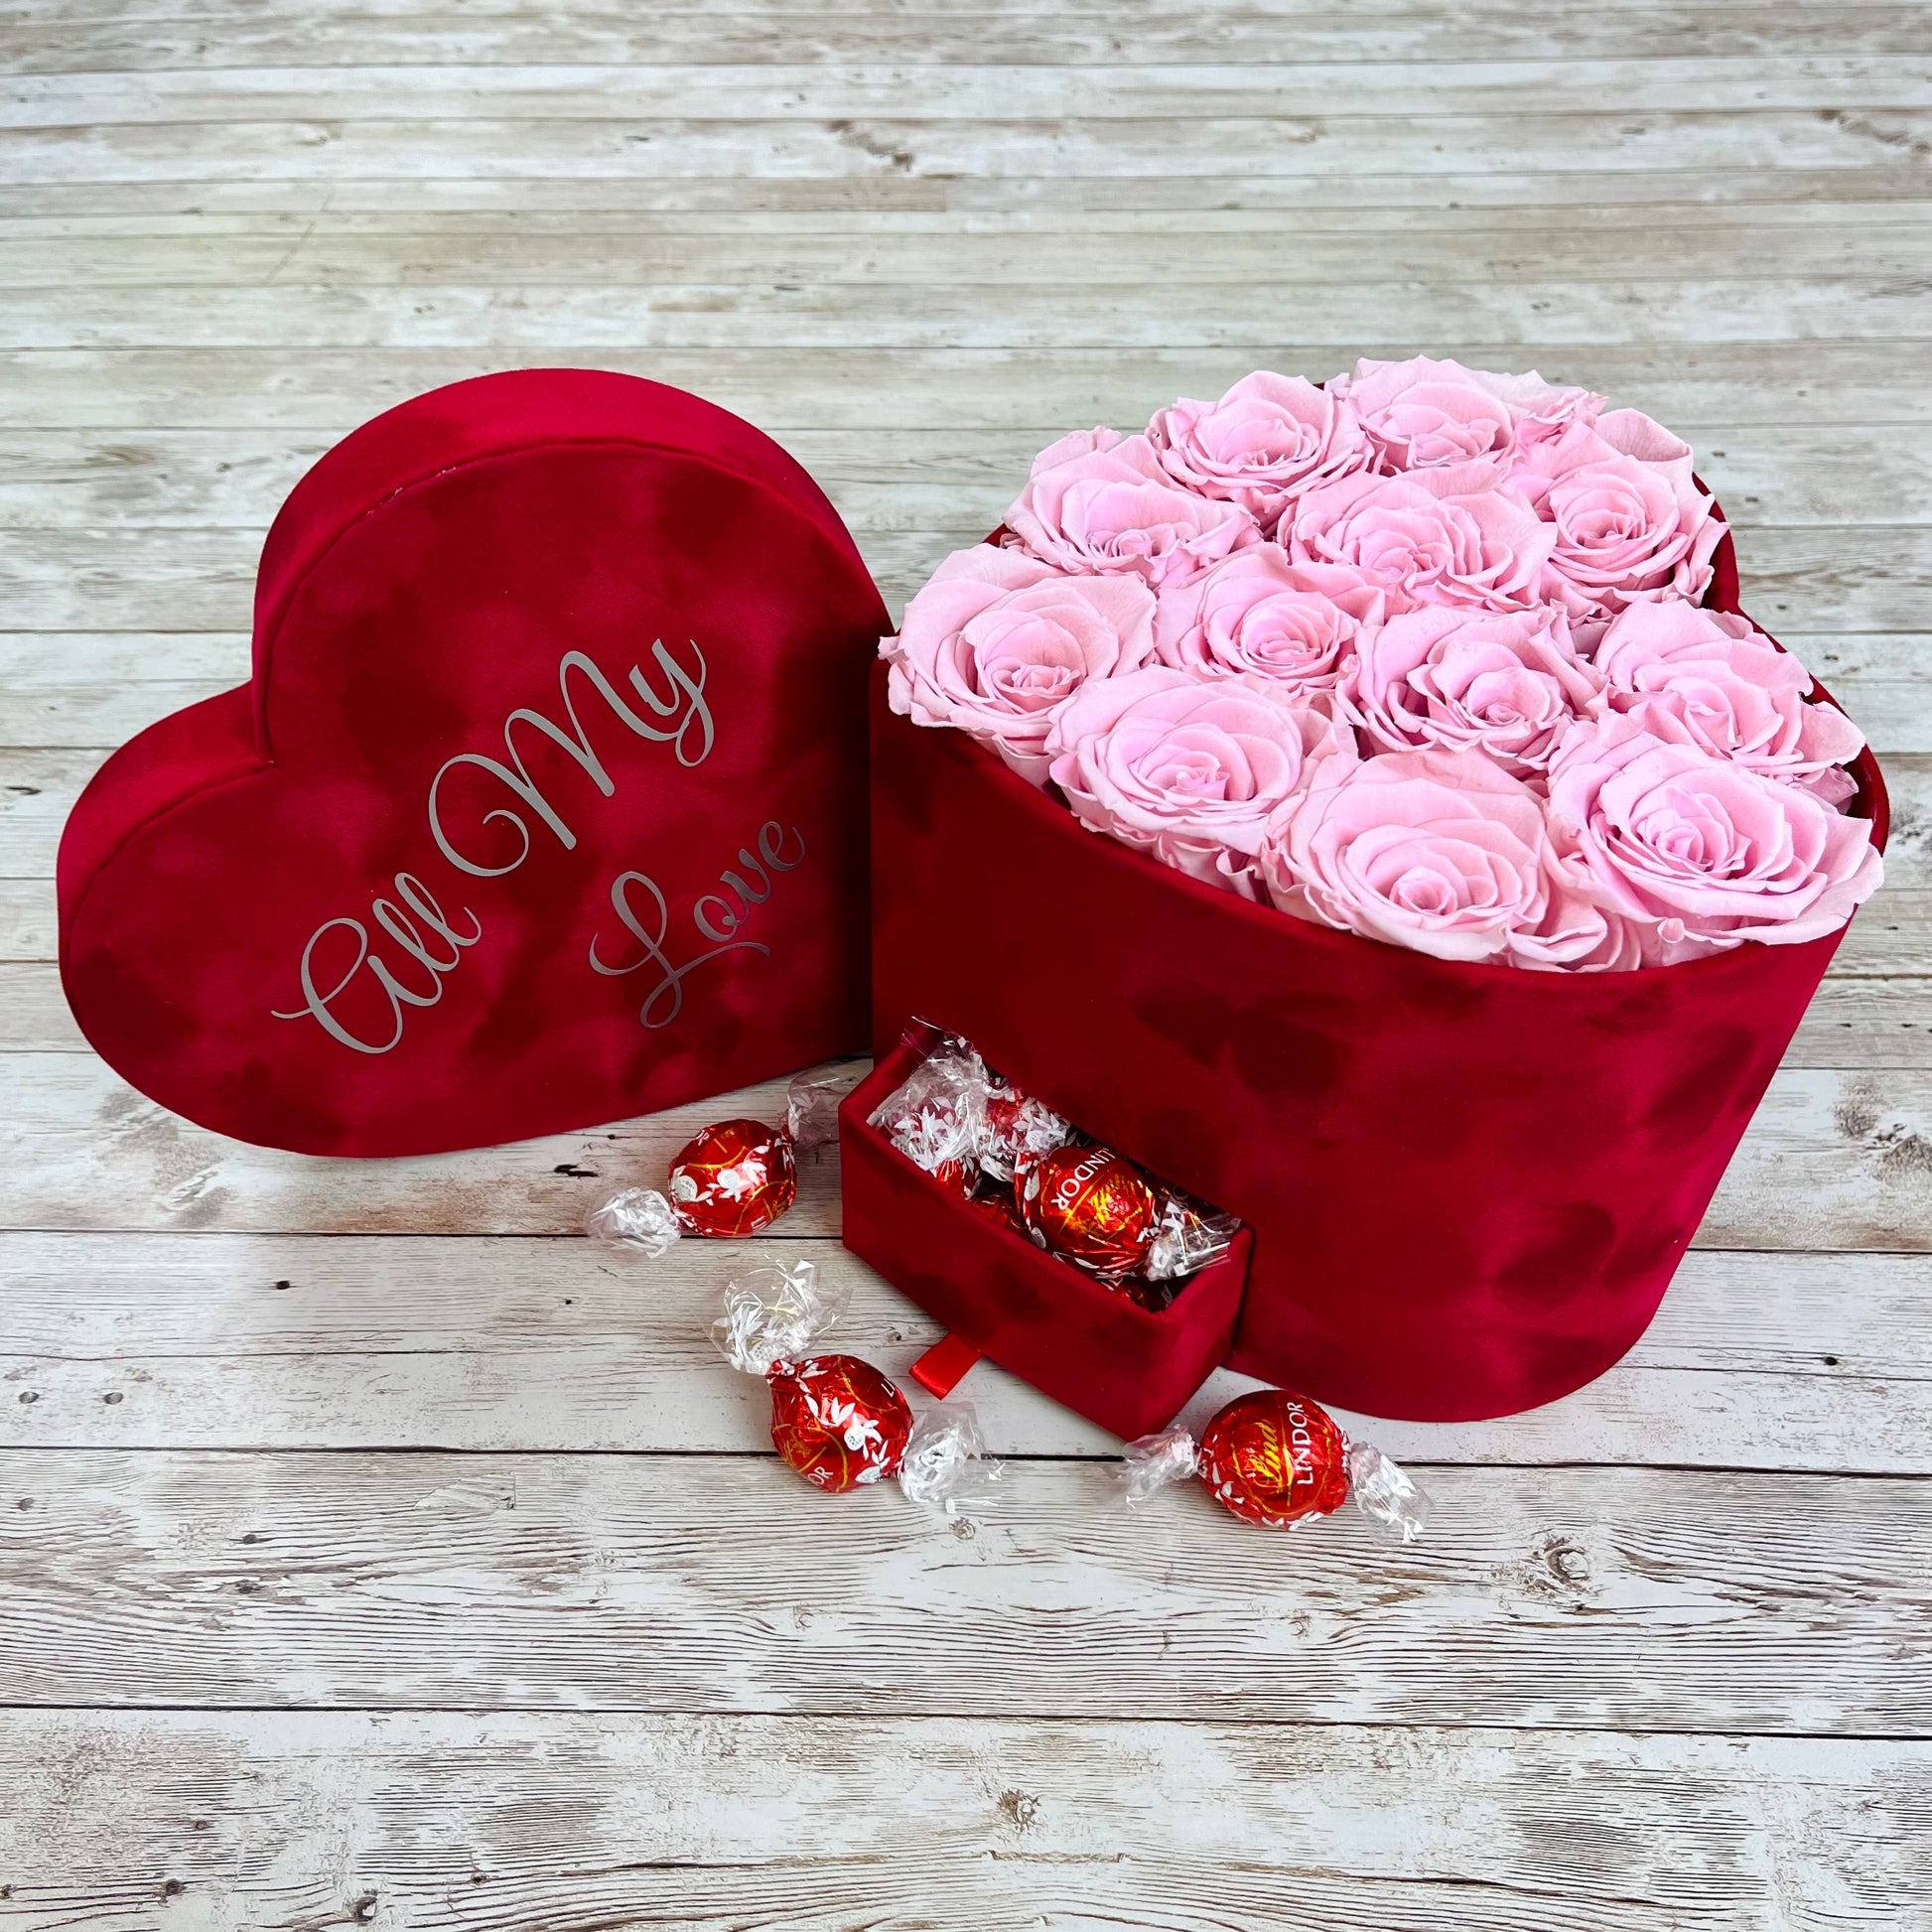 Red Velvet Heart Infinity Rose Box with chocolates - Pink One Year Roses